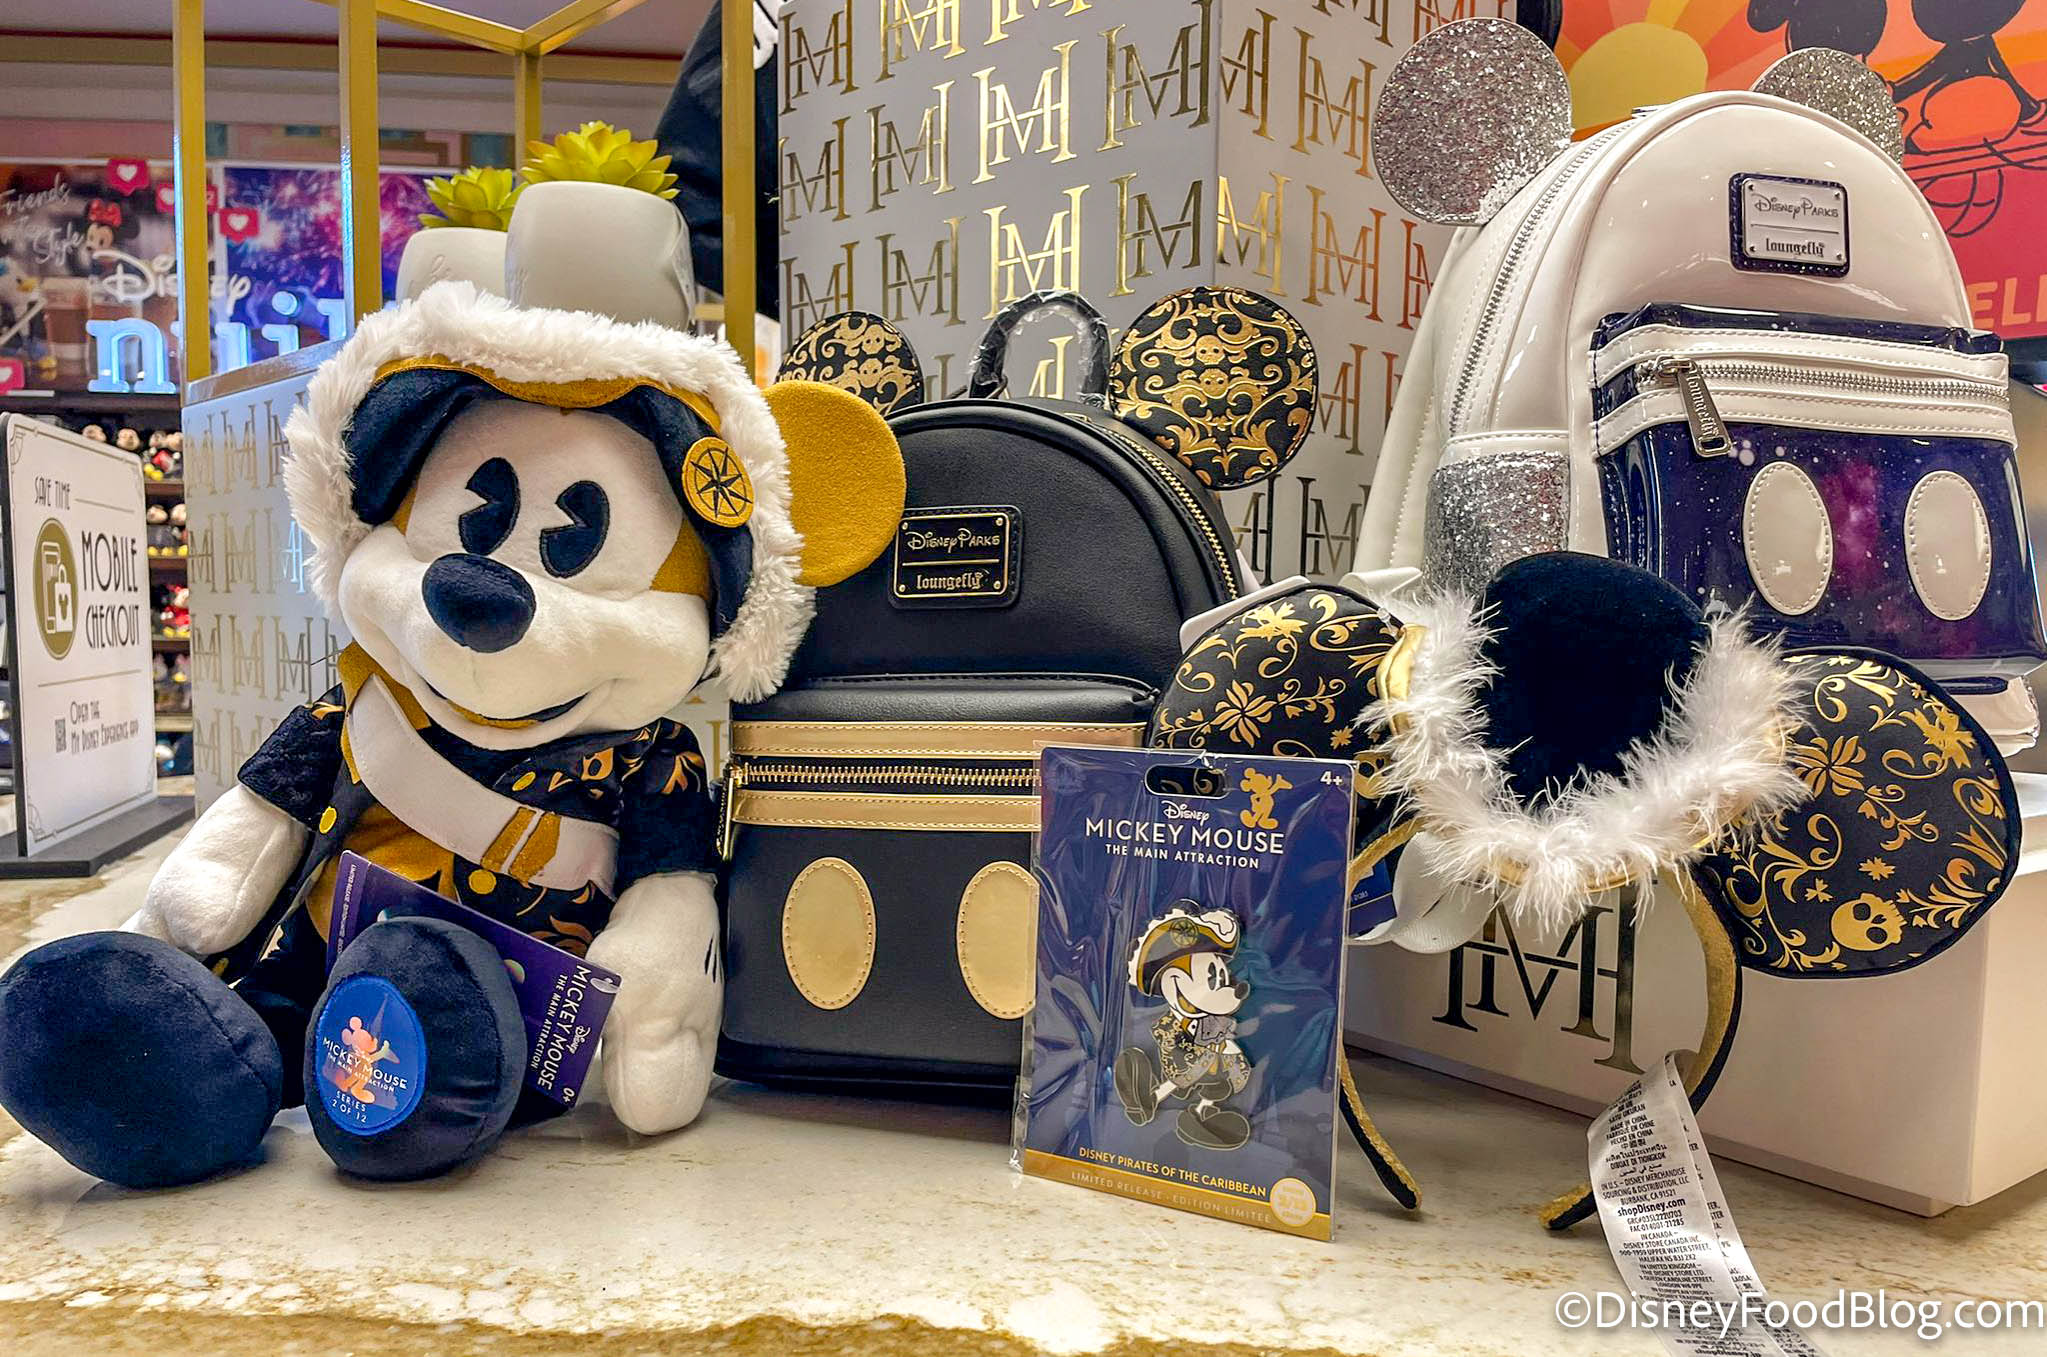 Mickey Pirates of the Caribbean - The Disney Nation™ Shop